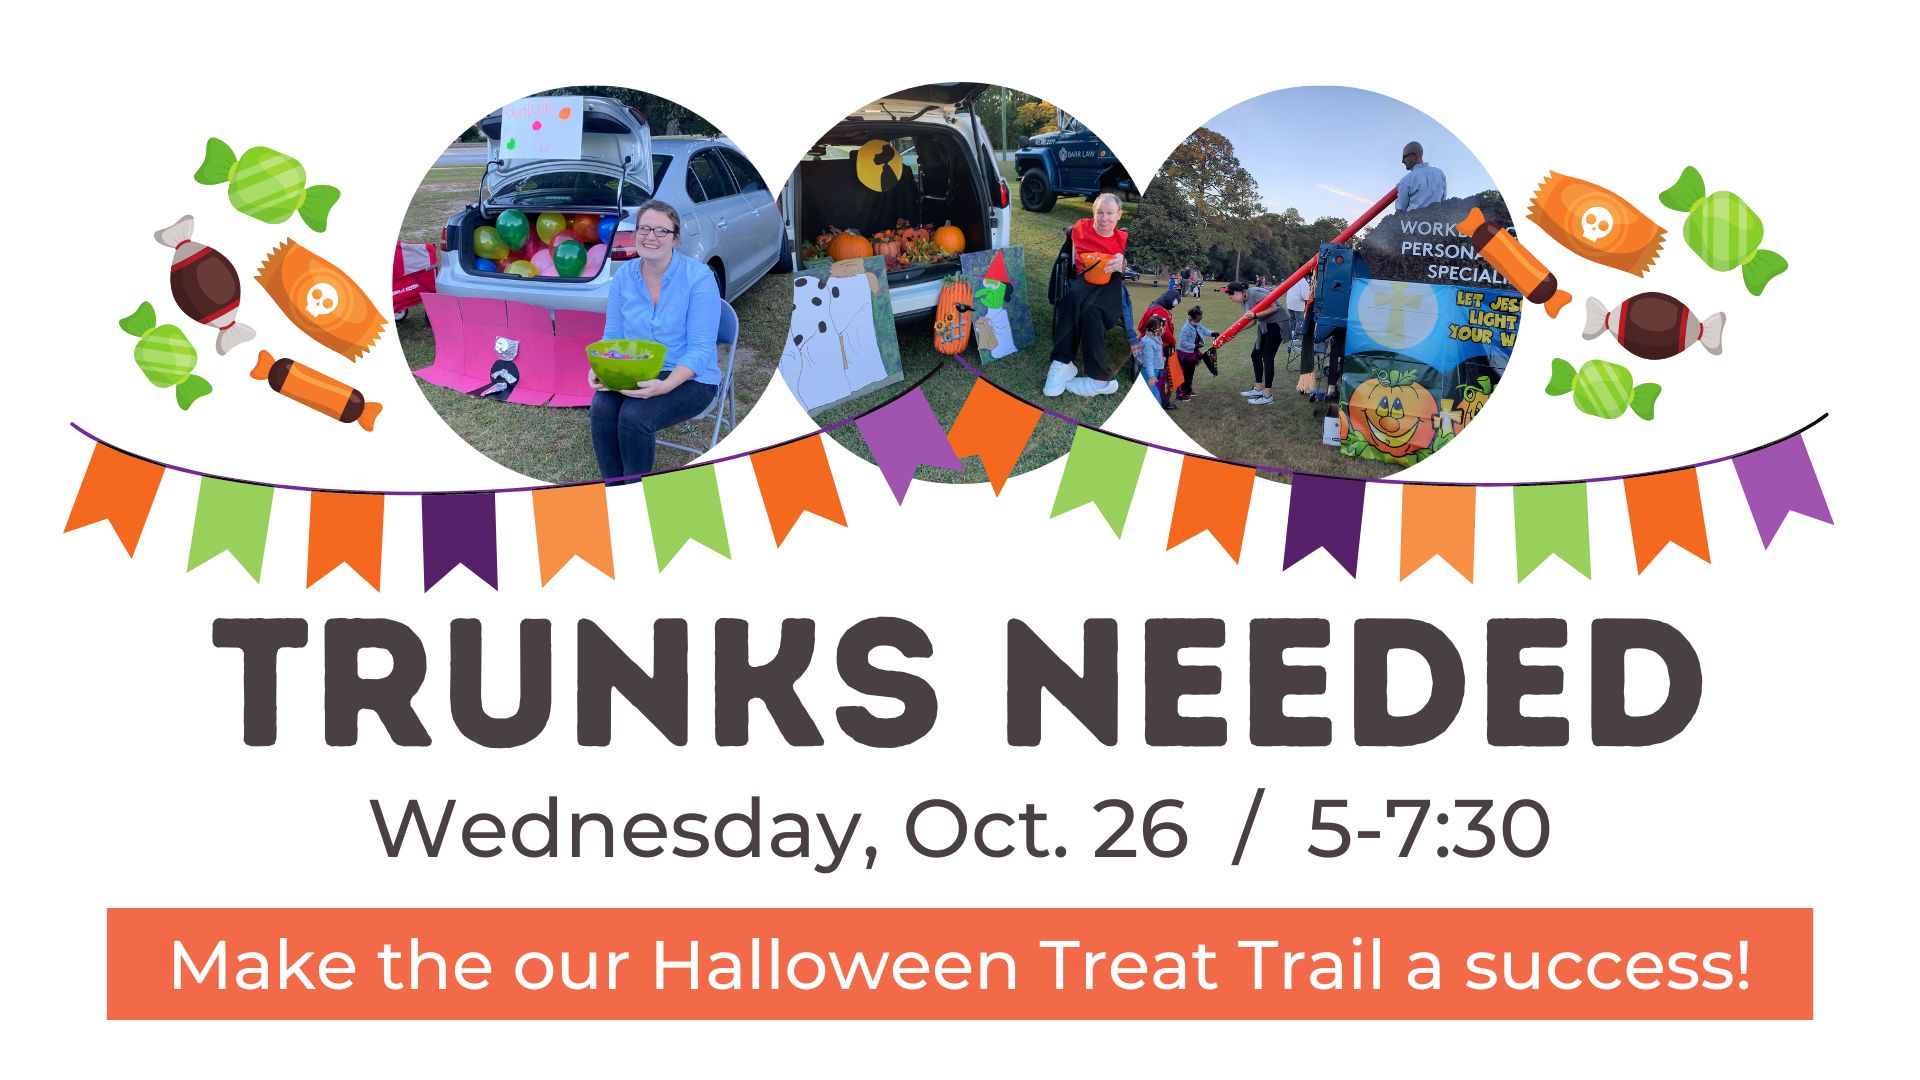 Trunk-or-Treat Trunks Needed